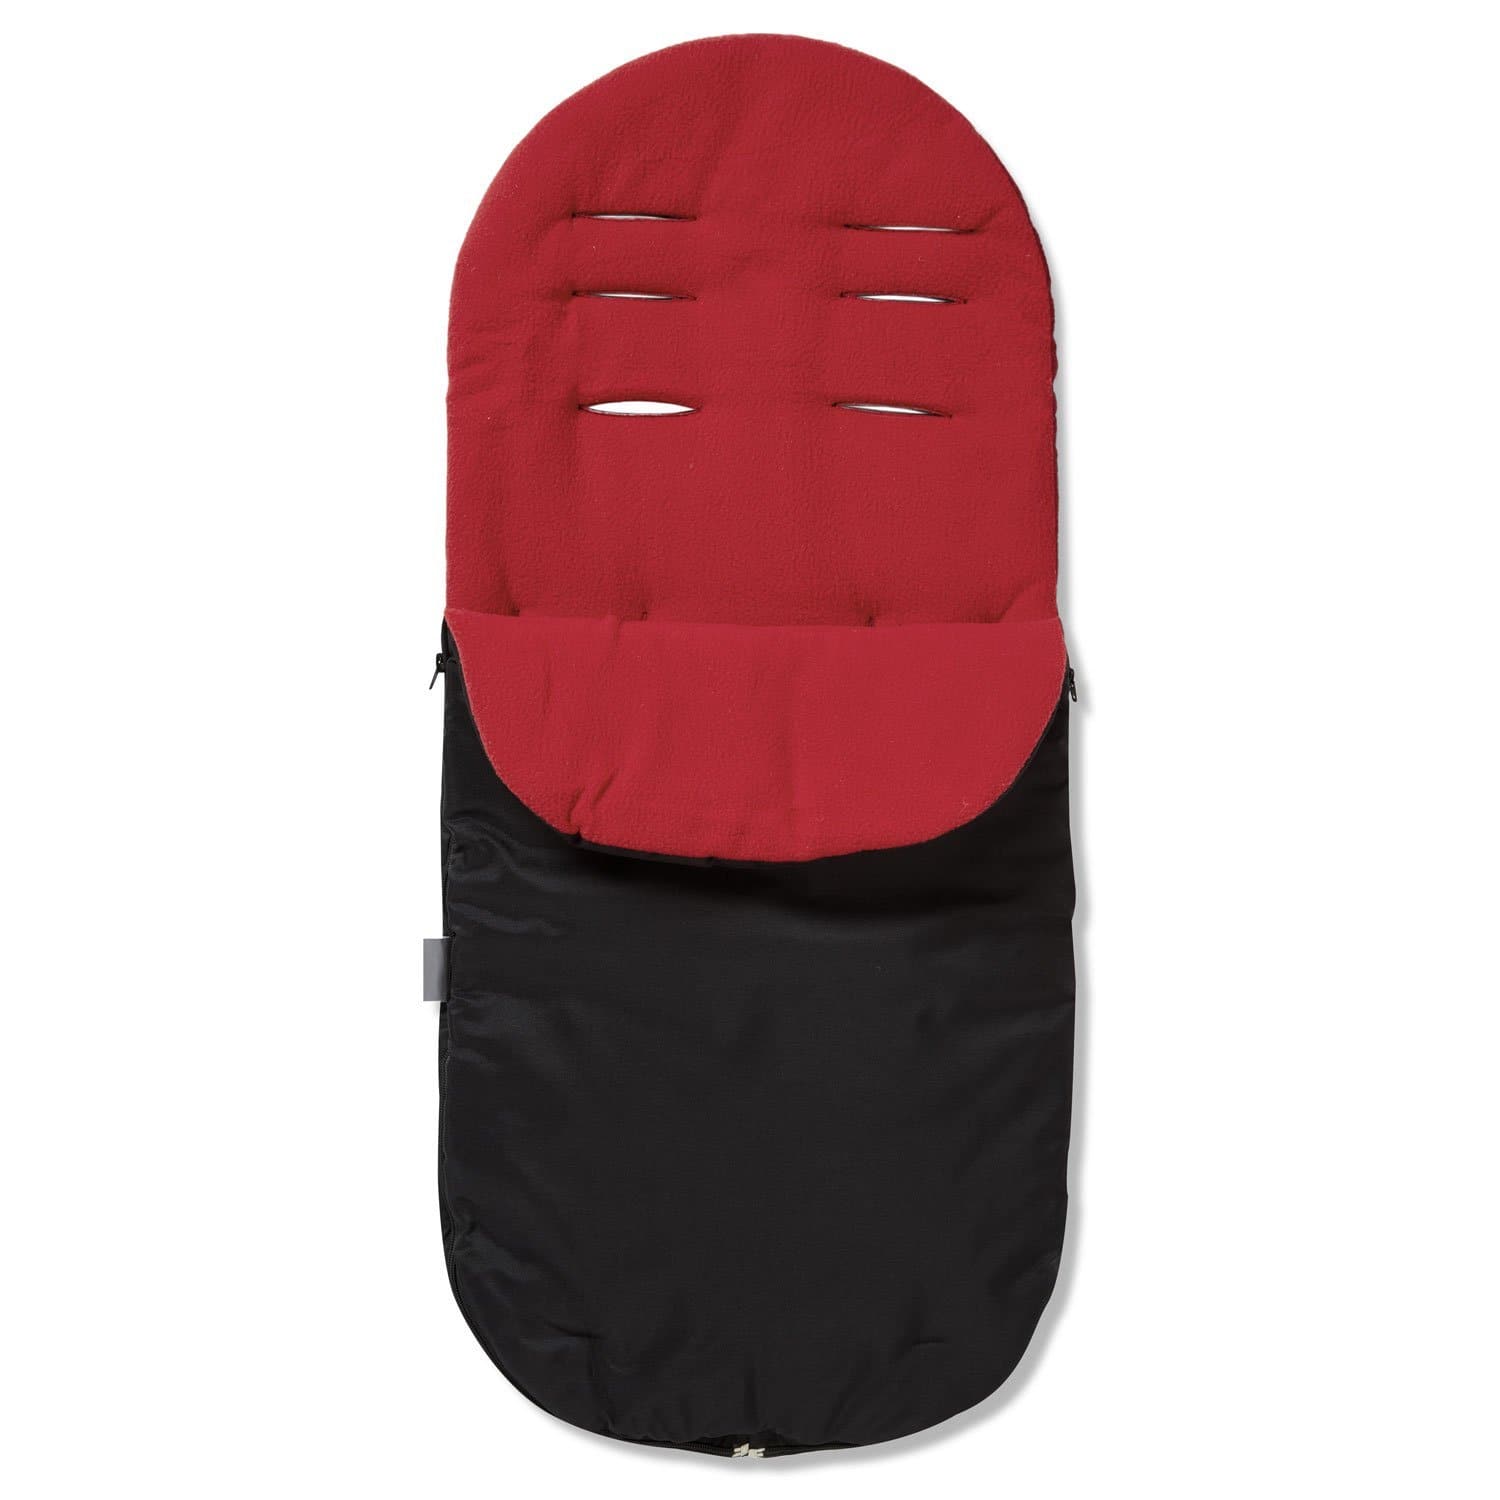 Footmuff / Cosy Toes Compatible with Esprit - Red / Fits All Models | For Your Little One